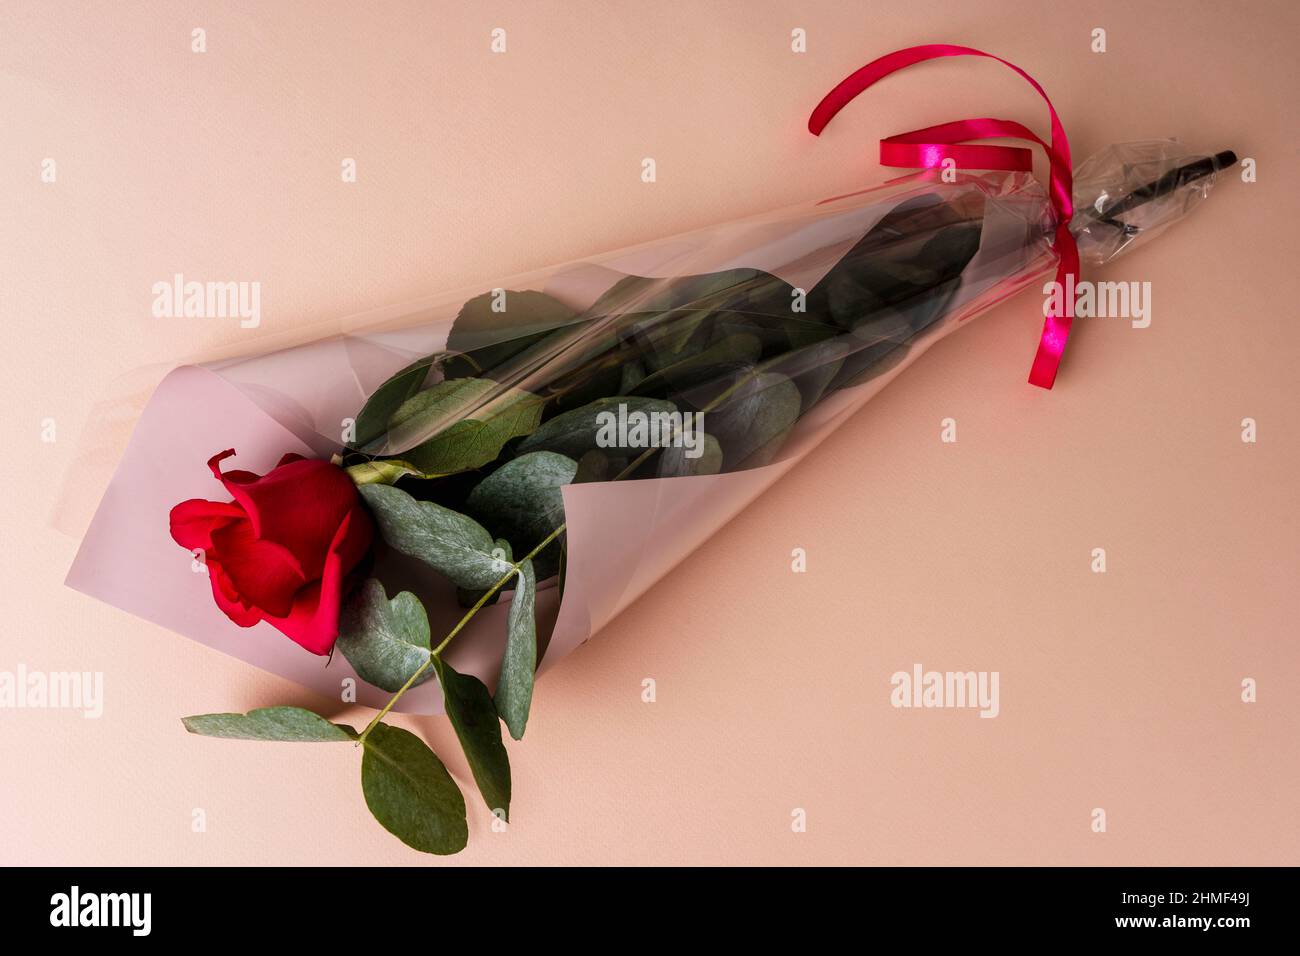 5 Type of Single Rose Wrapping, How To Wrap a Single Rose, Single Rose  Wrapping